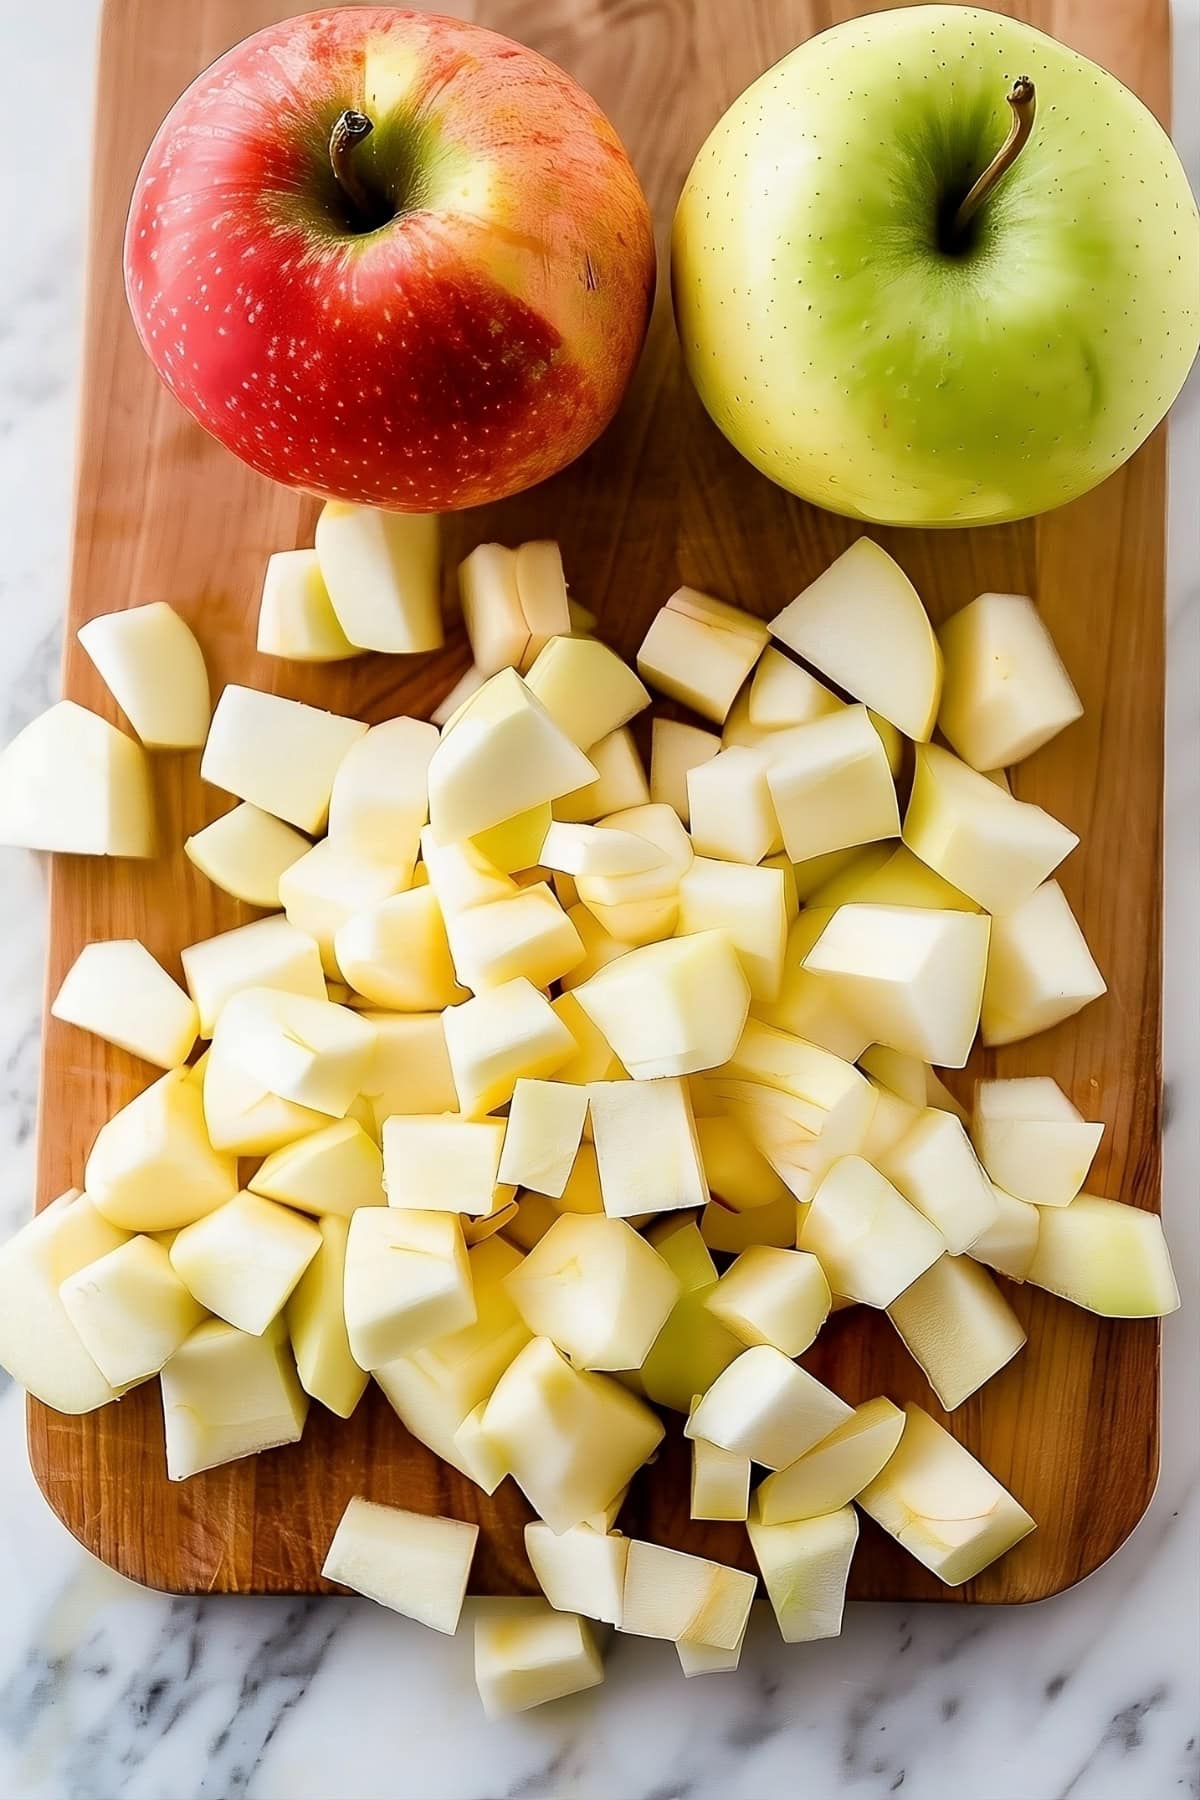 Chopped apples in a wooden board with green and red apples.